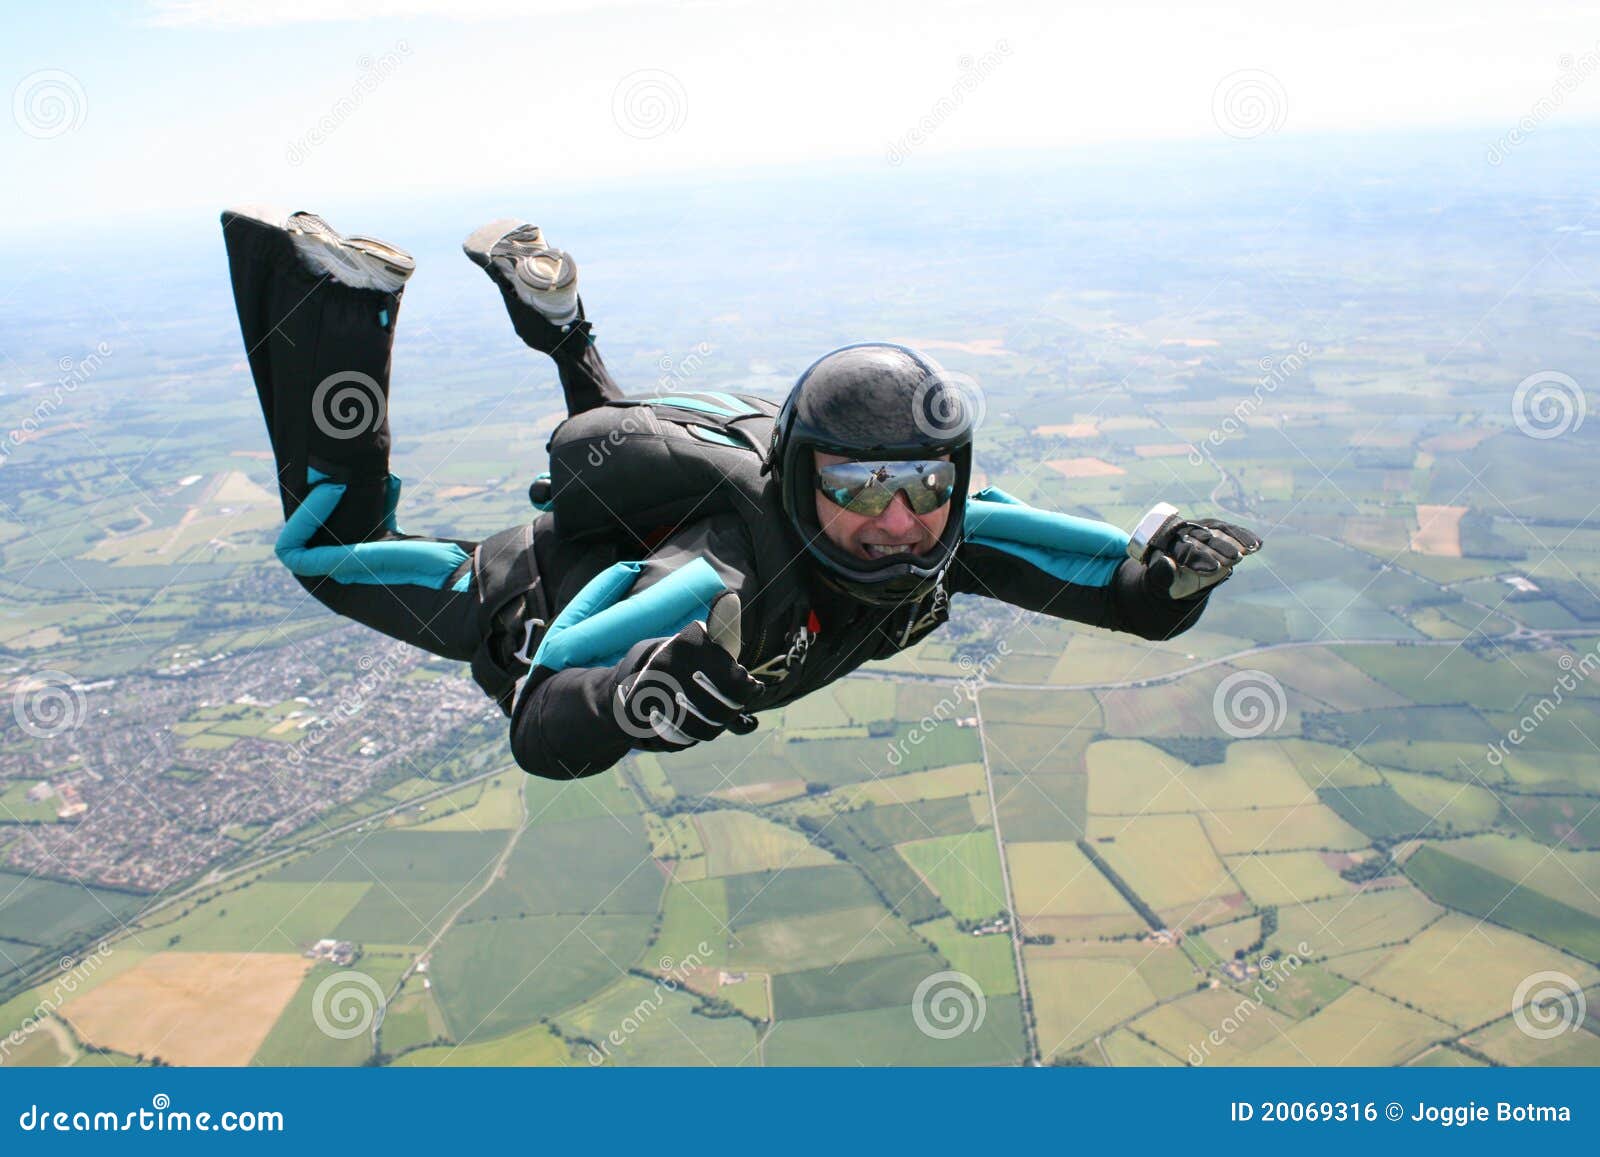 close-up of skydiver in freefall